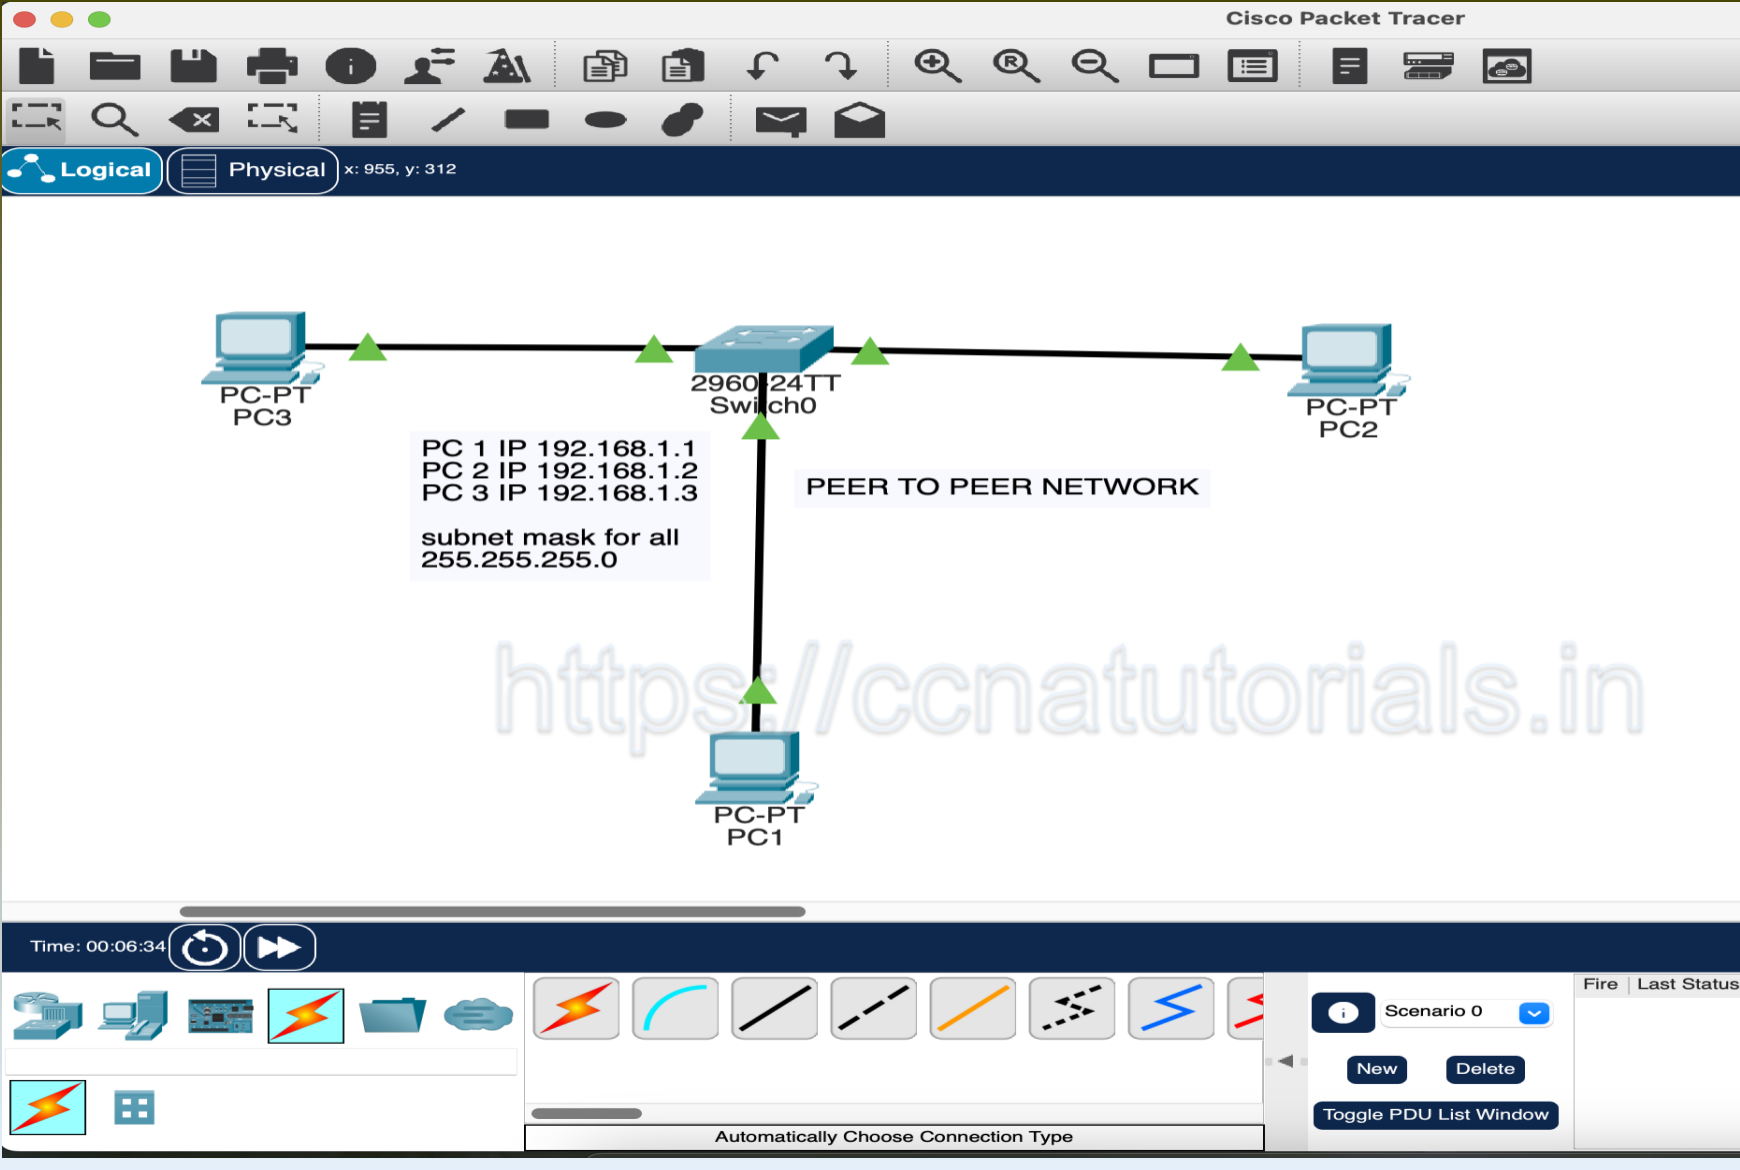 peer to peer networks packet tracer, packet tracer, ccna tutorial